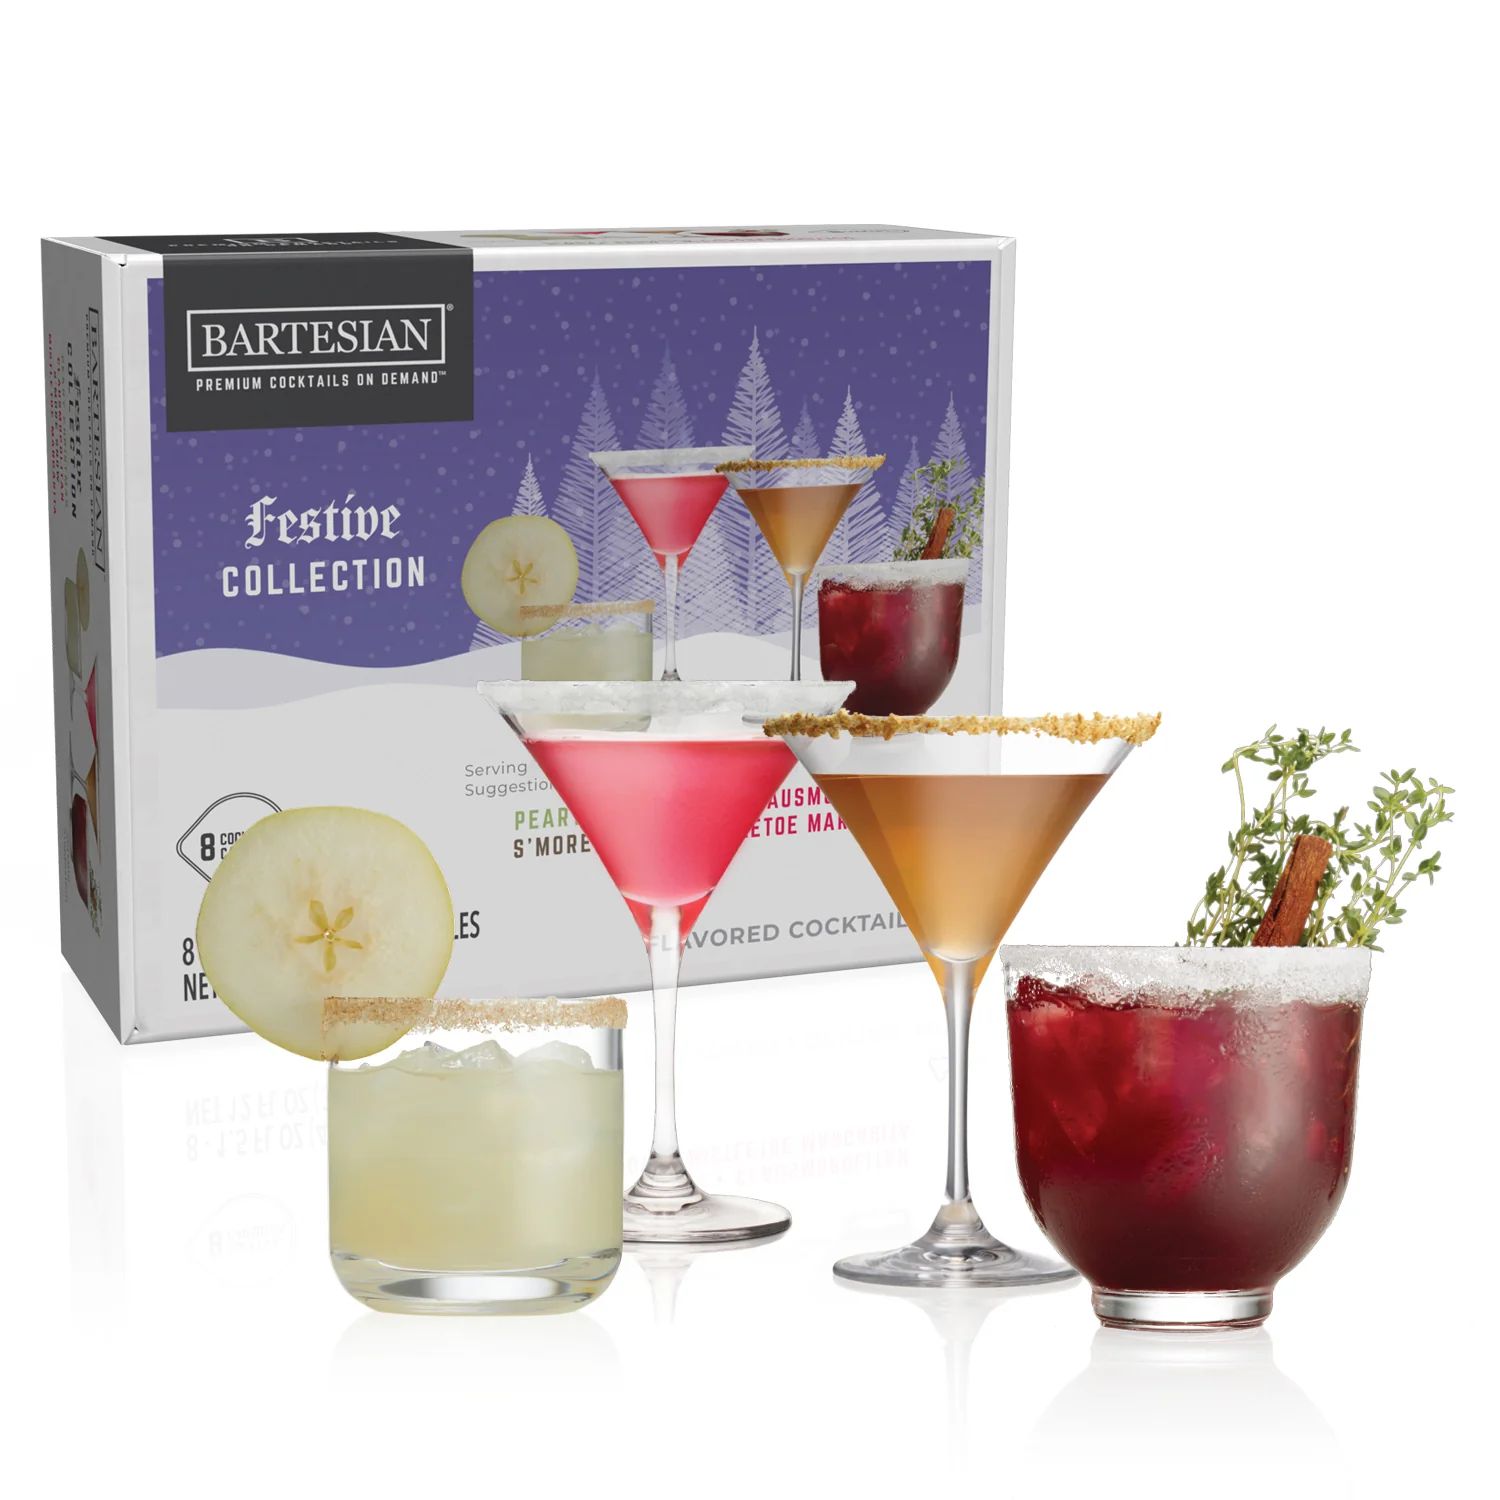 Festive Drink Collection - Holiday Variety Pack | Bartesian